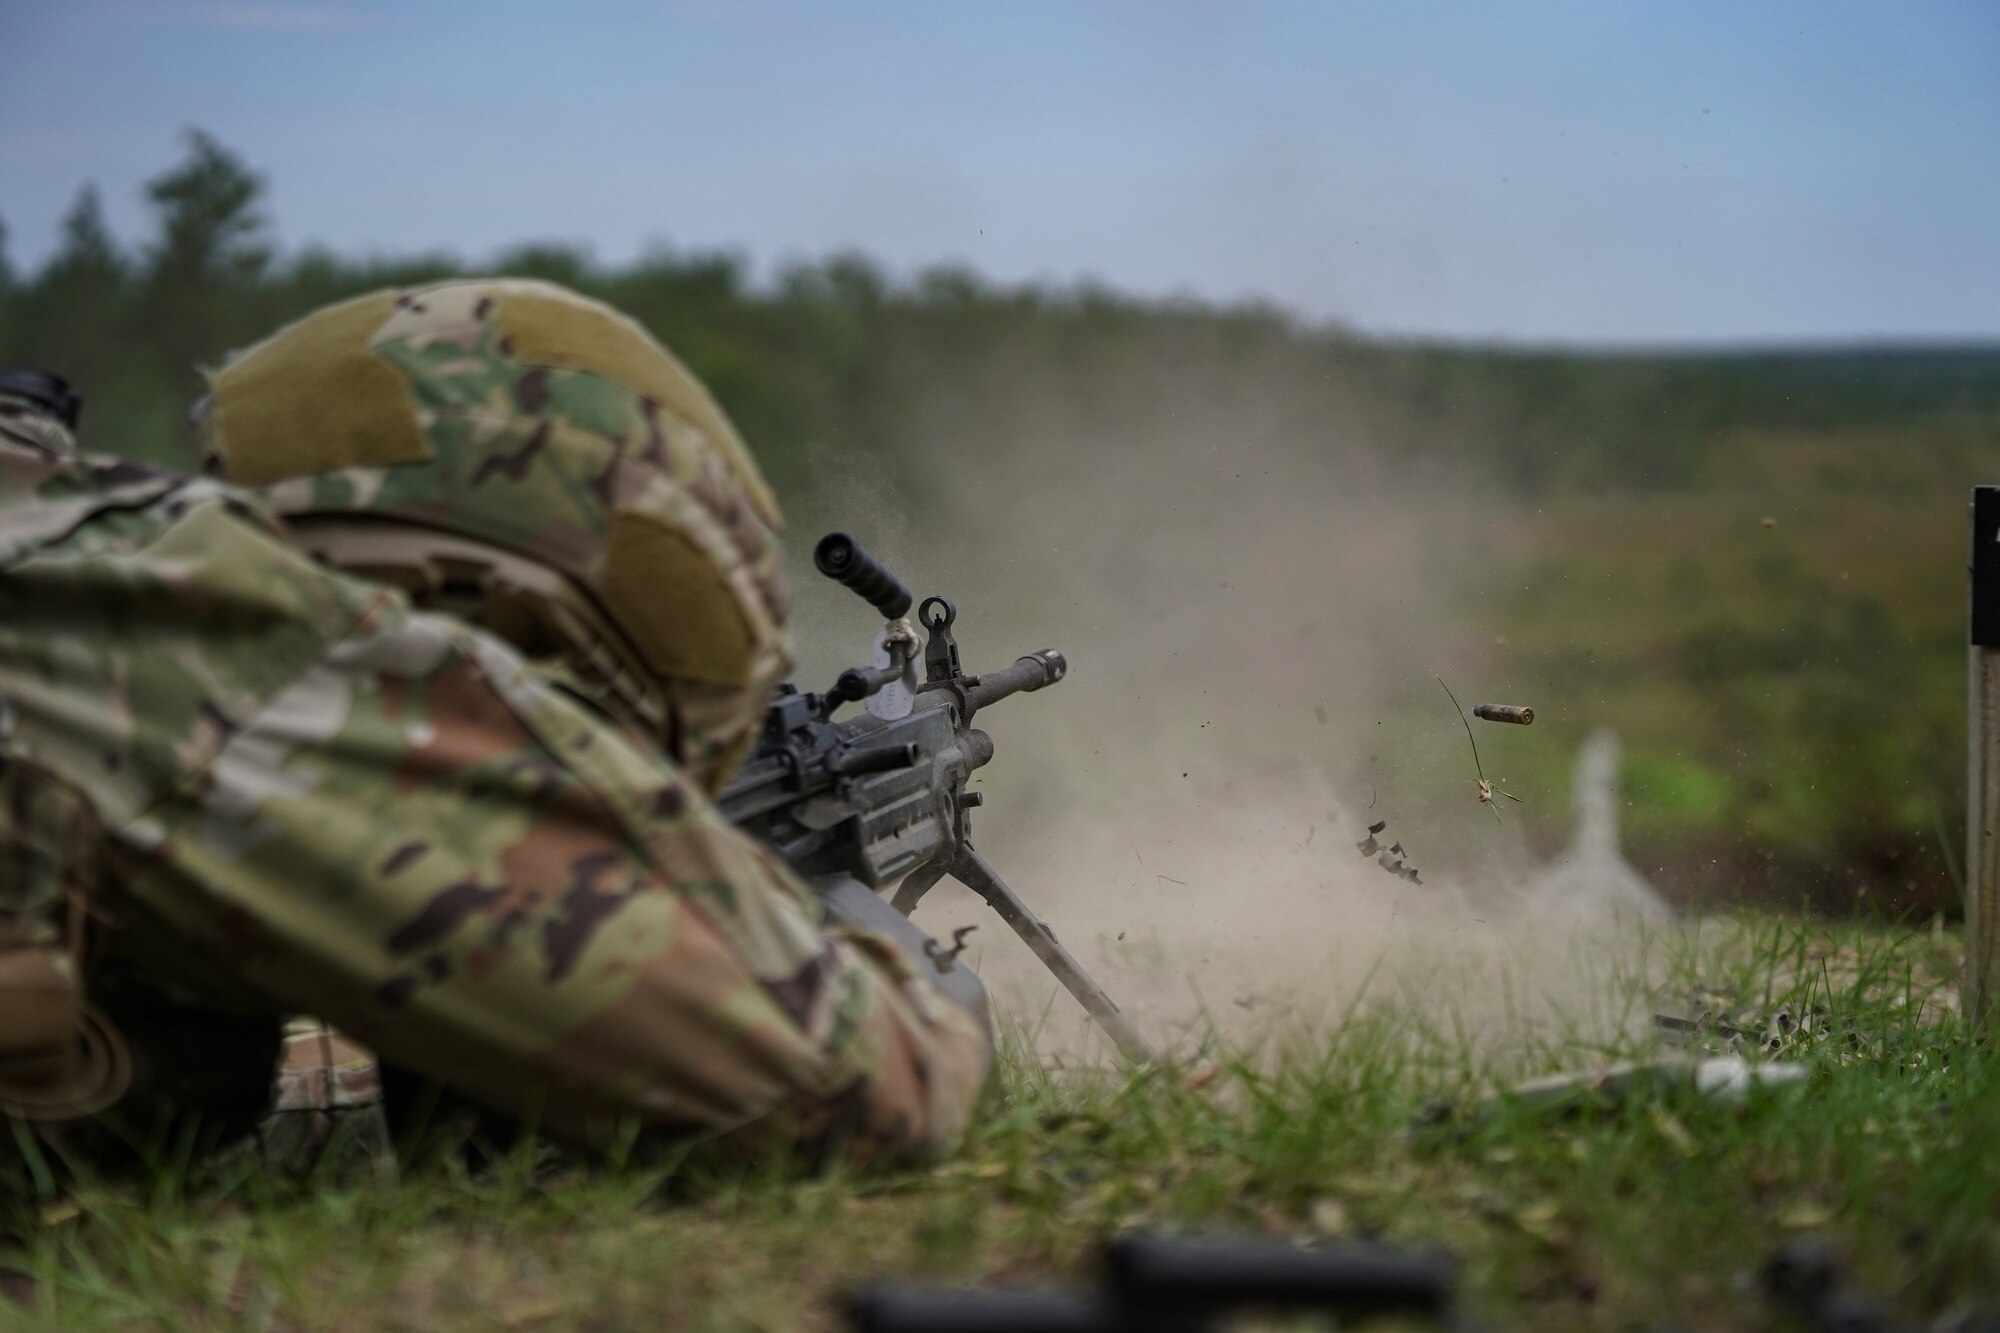 U.S. Air Force Airman Kenneth Shattwell, 81st Security Forces Squadron entry controller, fires M249 on range 14 B at Camp Shelby, Mississippi, Sept. 23, 2022. Defenders rotate through firing different heavy weapon systems to hone their defense capabilities